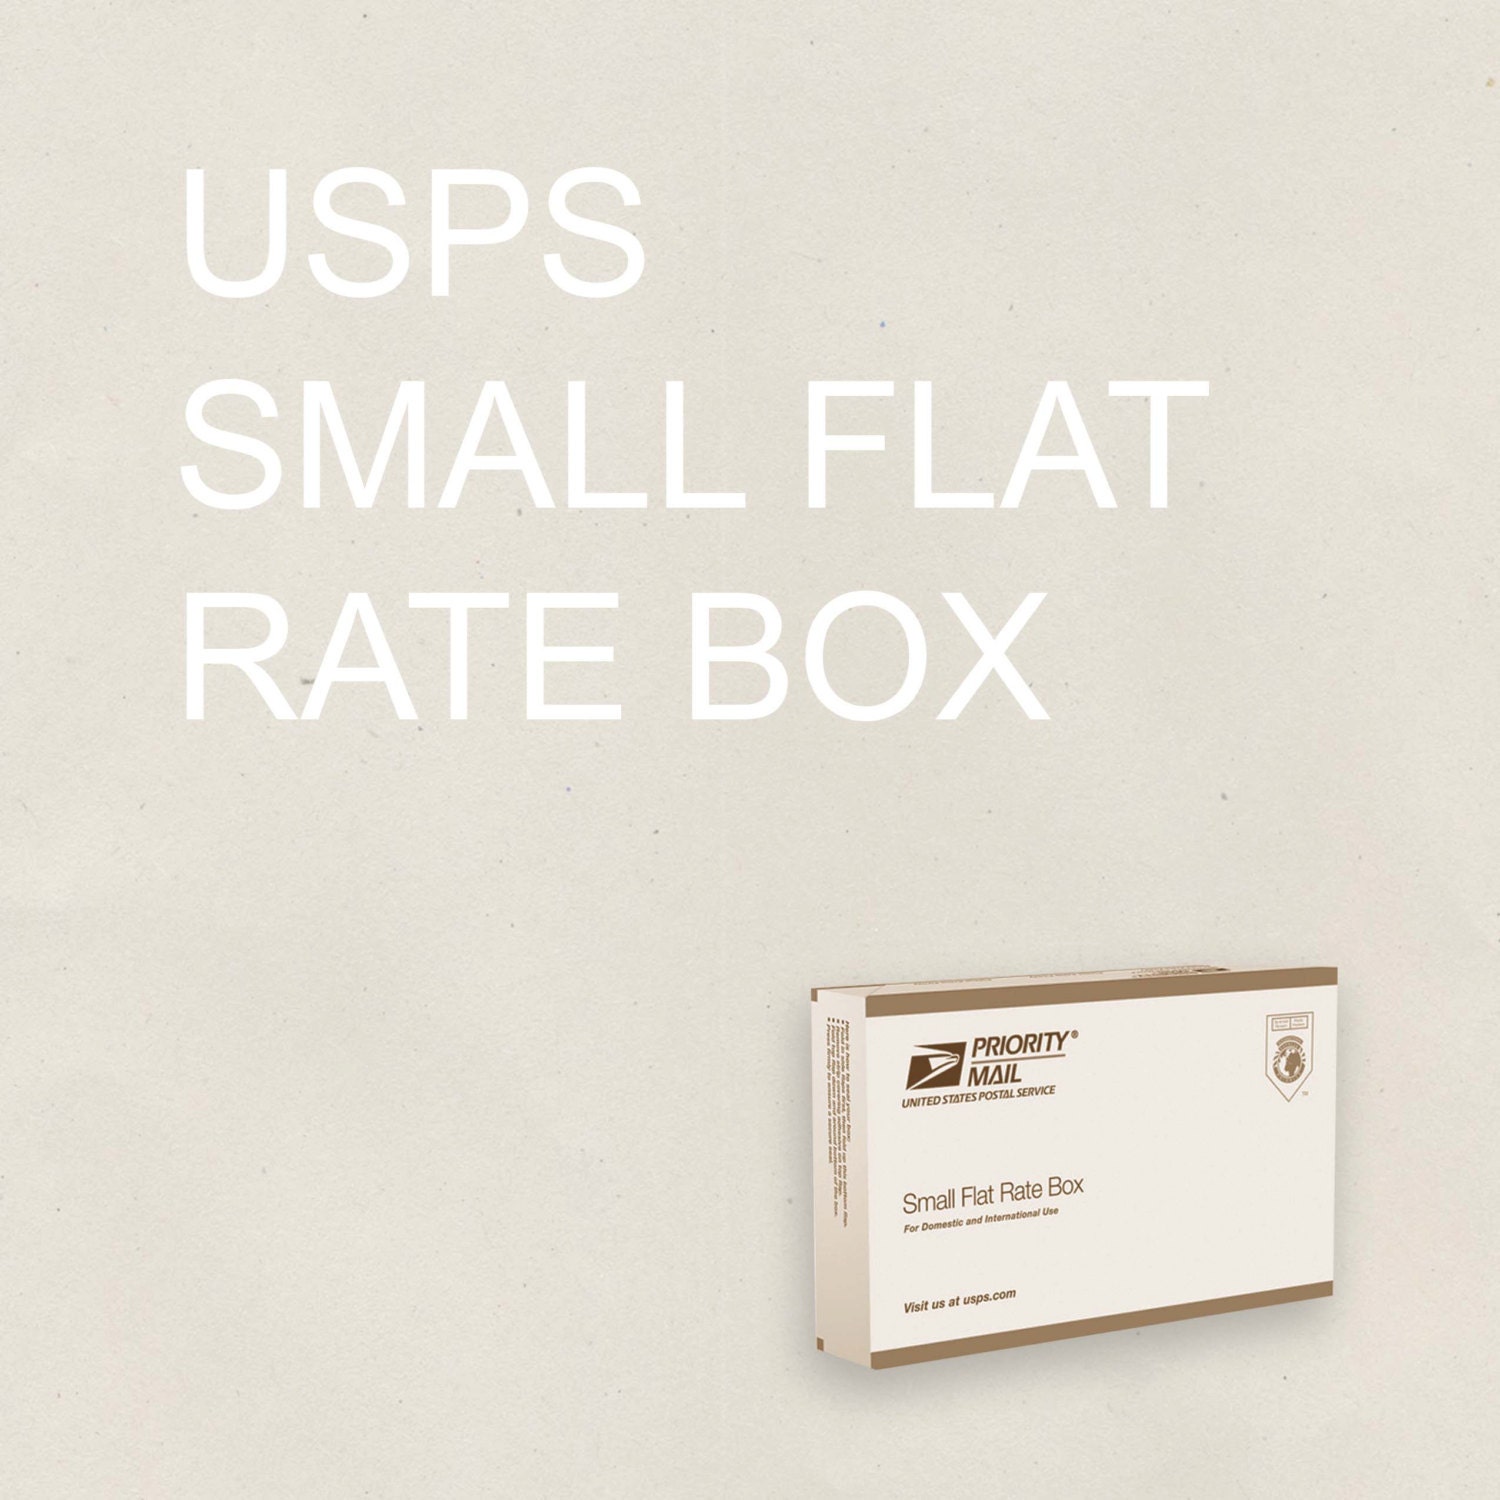 can i use my own box for usps flat rate